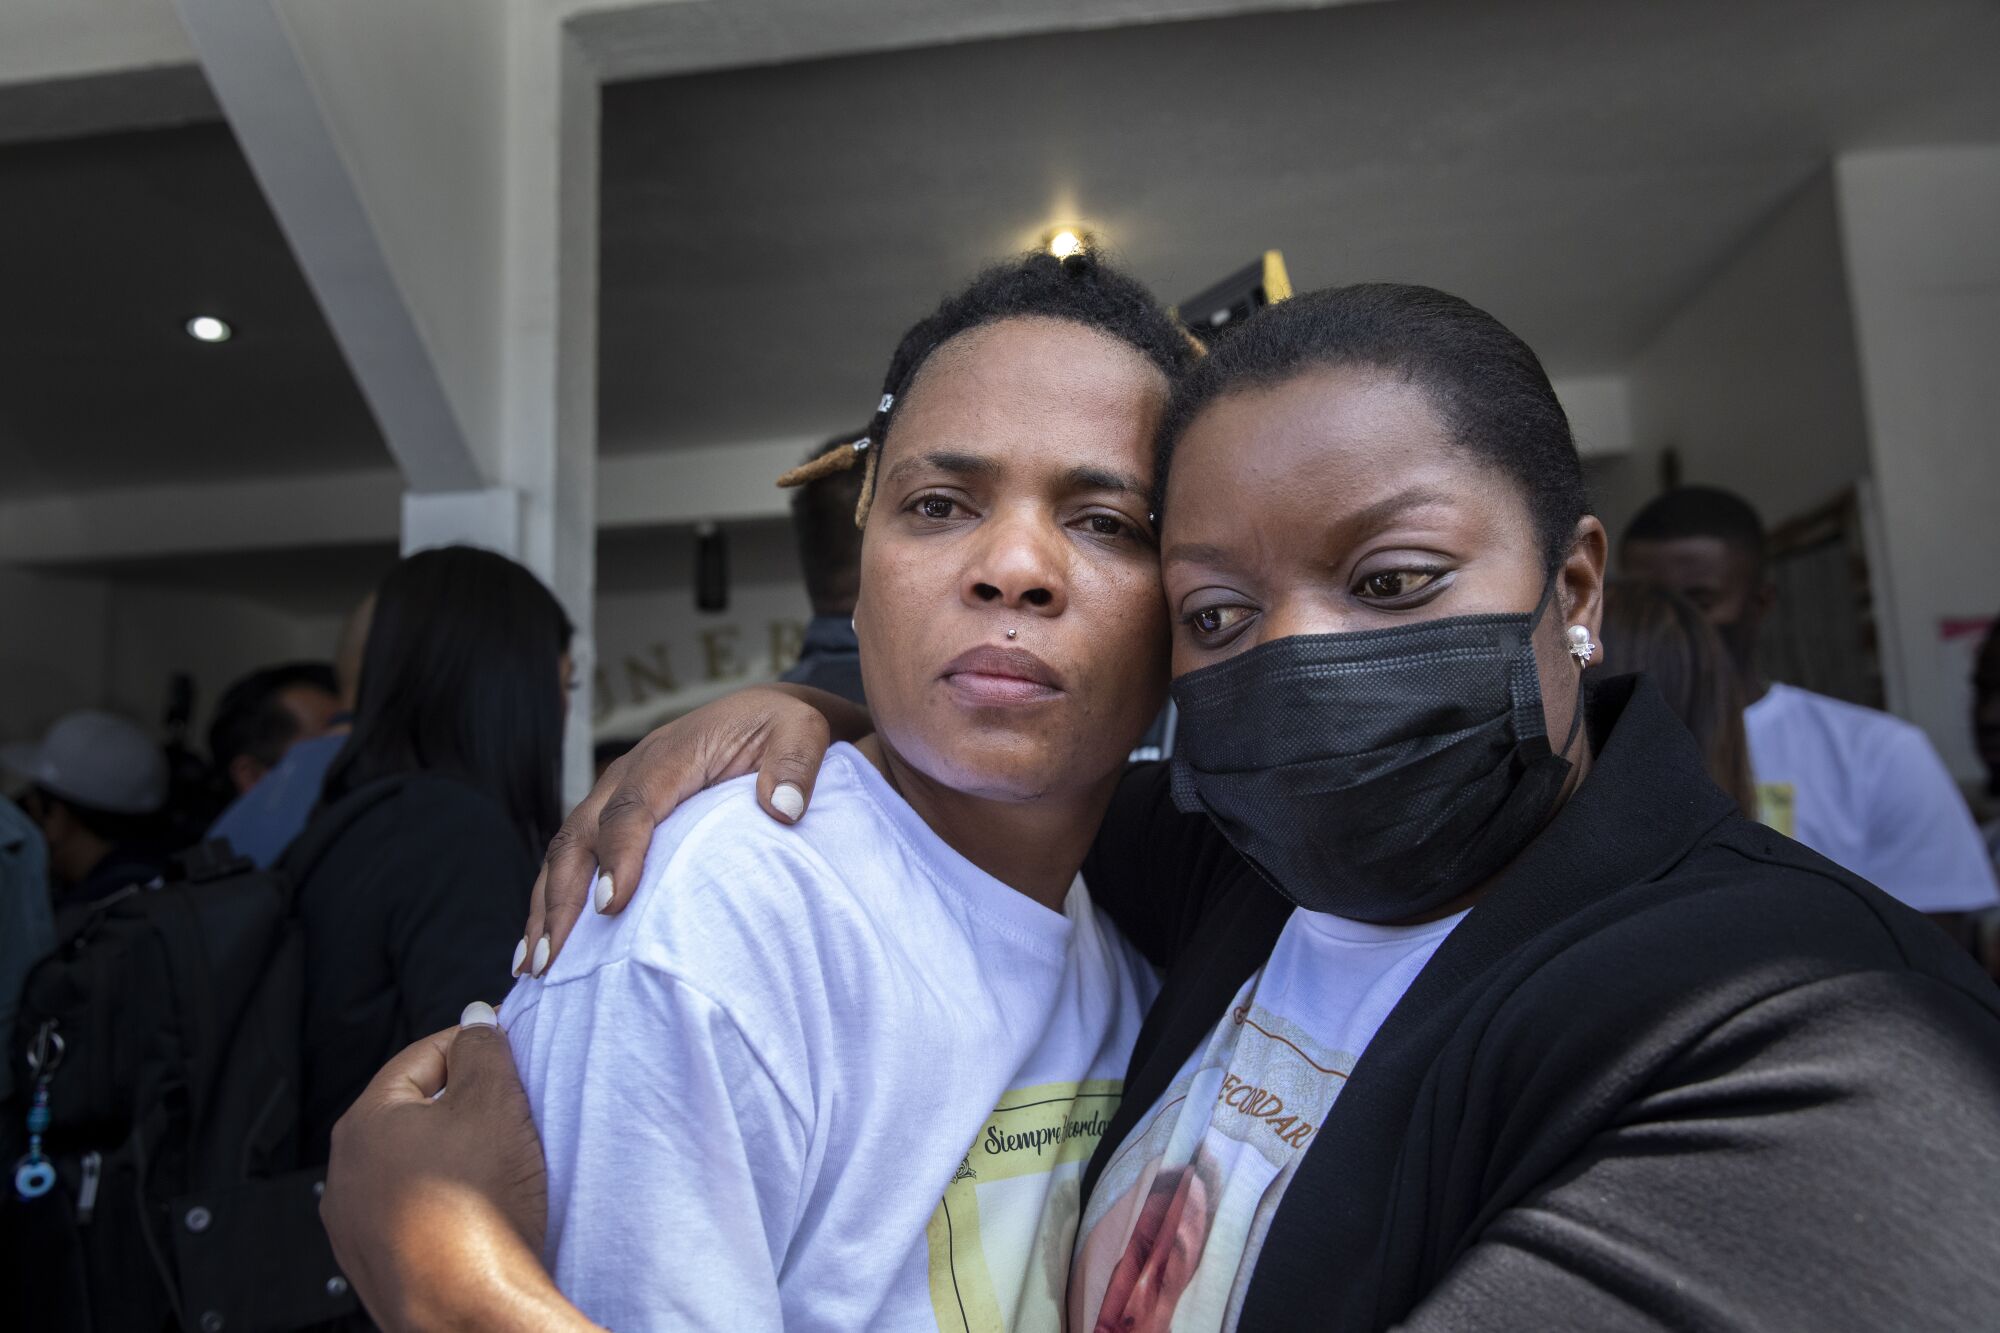 Pethou Archange, left, and Guerline Jozef, co-founder of Haitian Bridge Alliance, hug after the funeral.